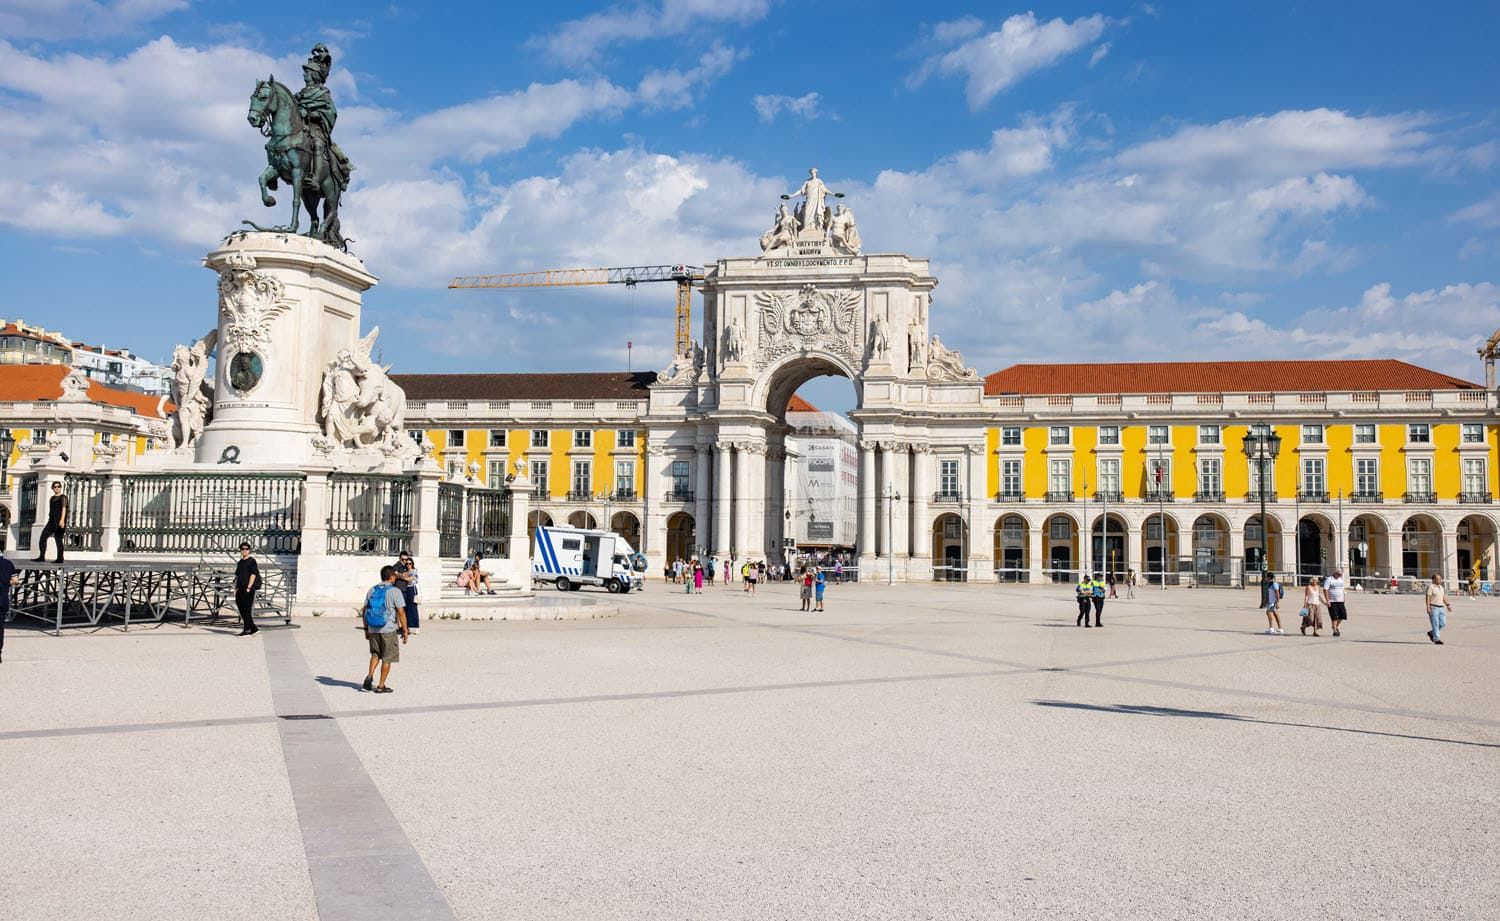 Praca do Comercio | Best Things to Do in Lisbon